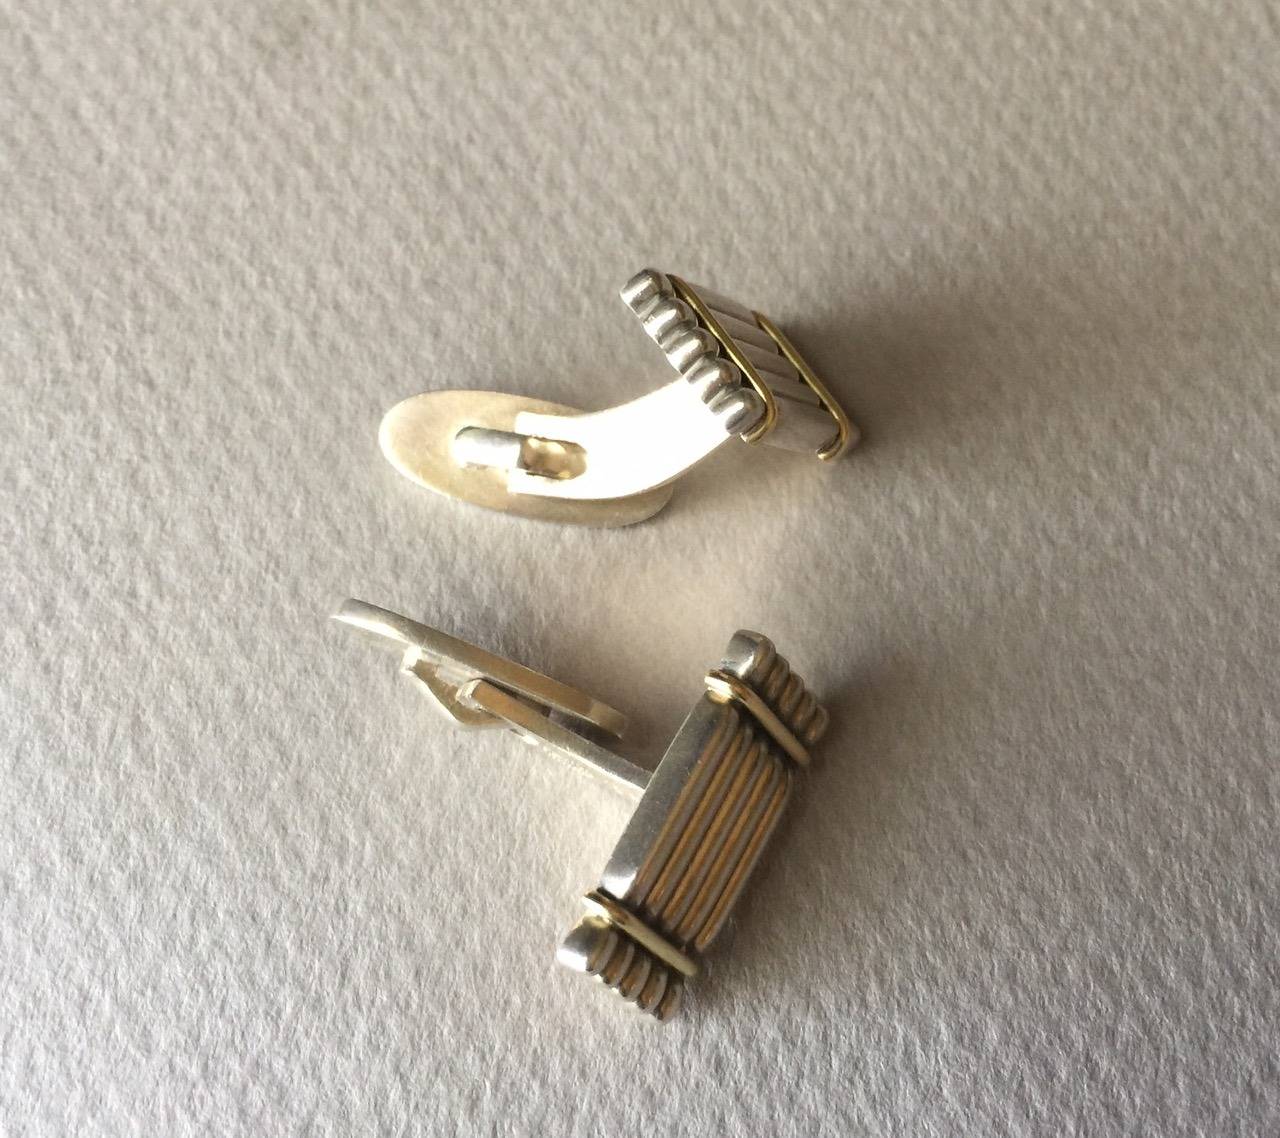 Georg Jensen 18K Gold and Silver Cufflinks No. 156.

Sterling silver and 18 karat gold cufflinks designed by Lene Munthe. 

These cufflinks are in excellent condition and come with the original Georg Jensen box.